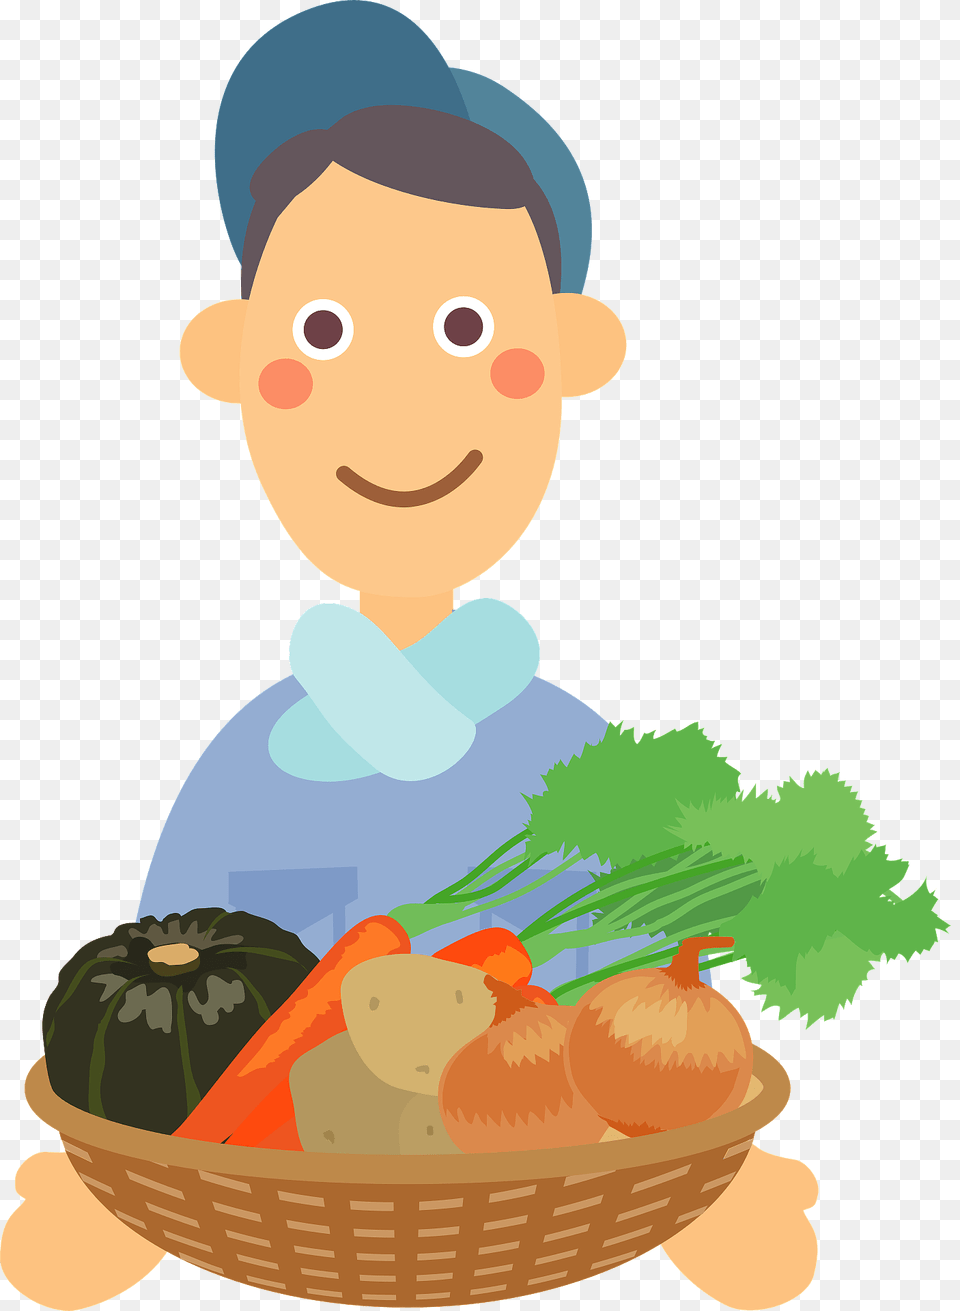 Farmer Carrying A Basket Of Vegetables Clipart, Carrot, Food, Vegetable, Produce Png Image